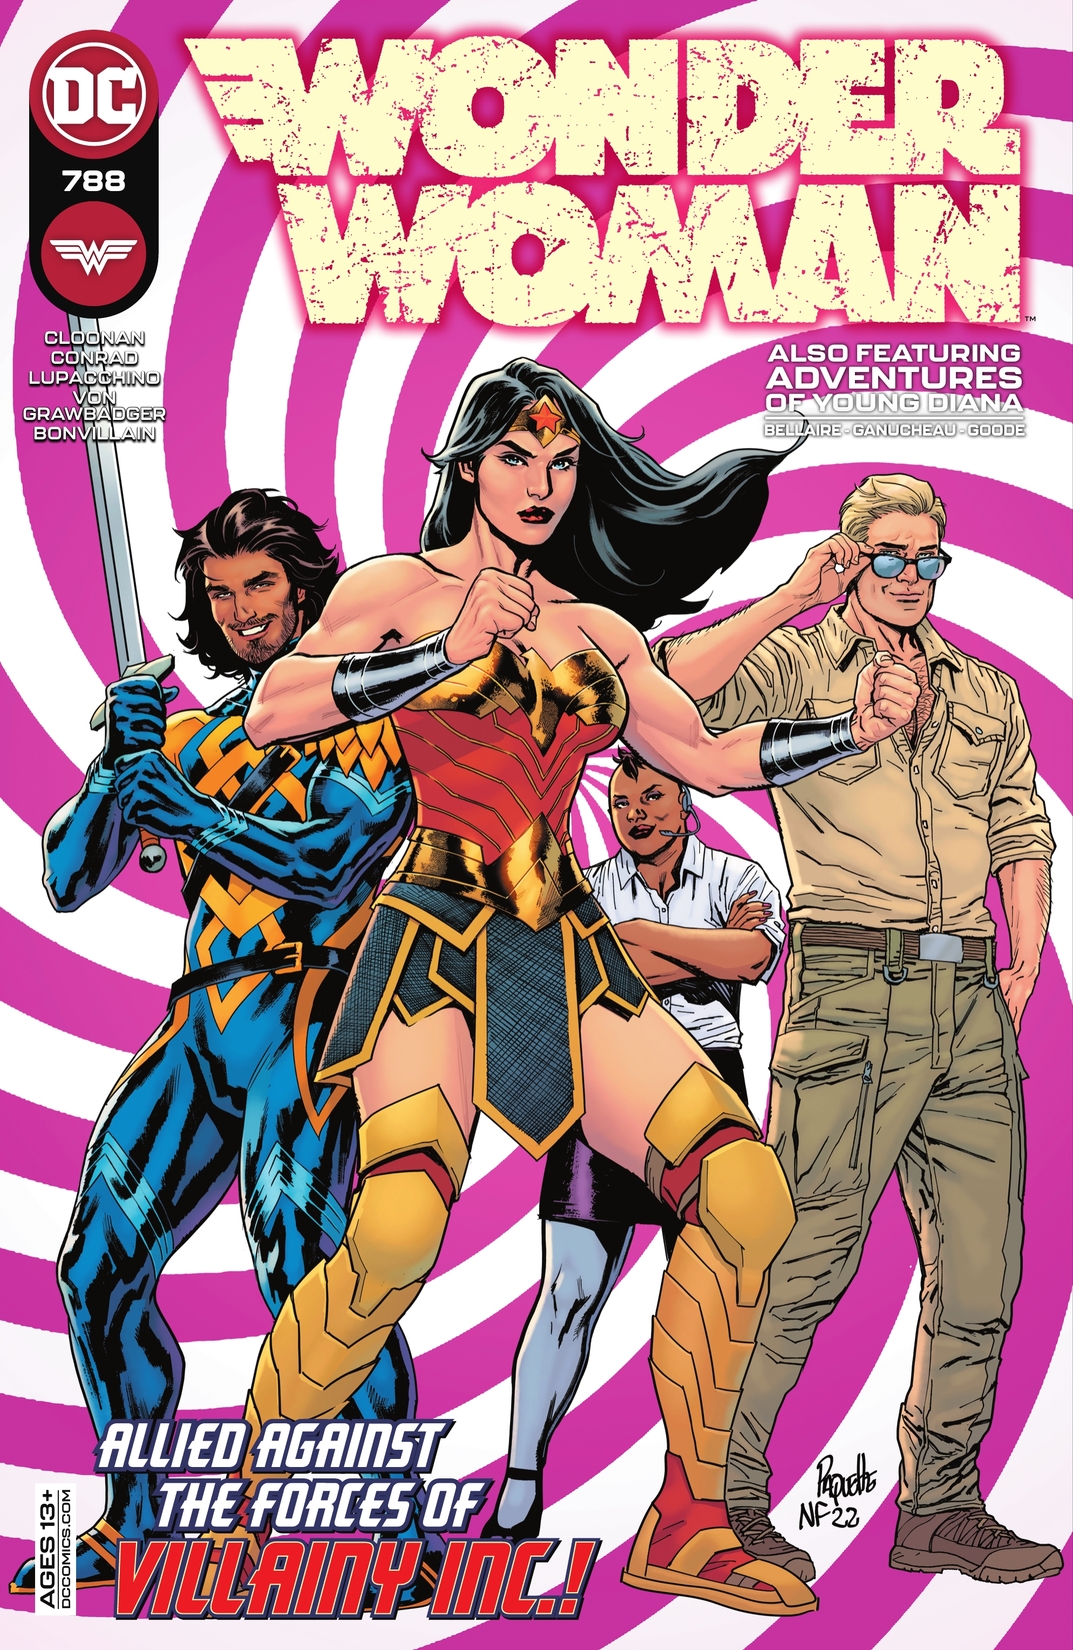 Wonder Woman (2016-) #788 preview images